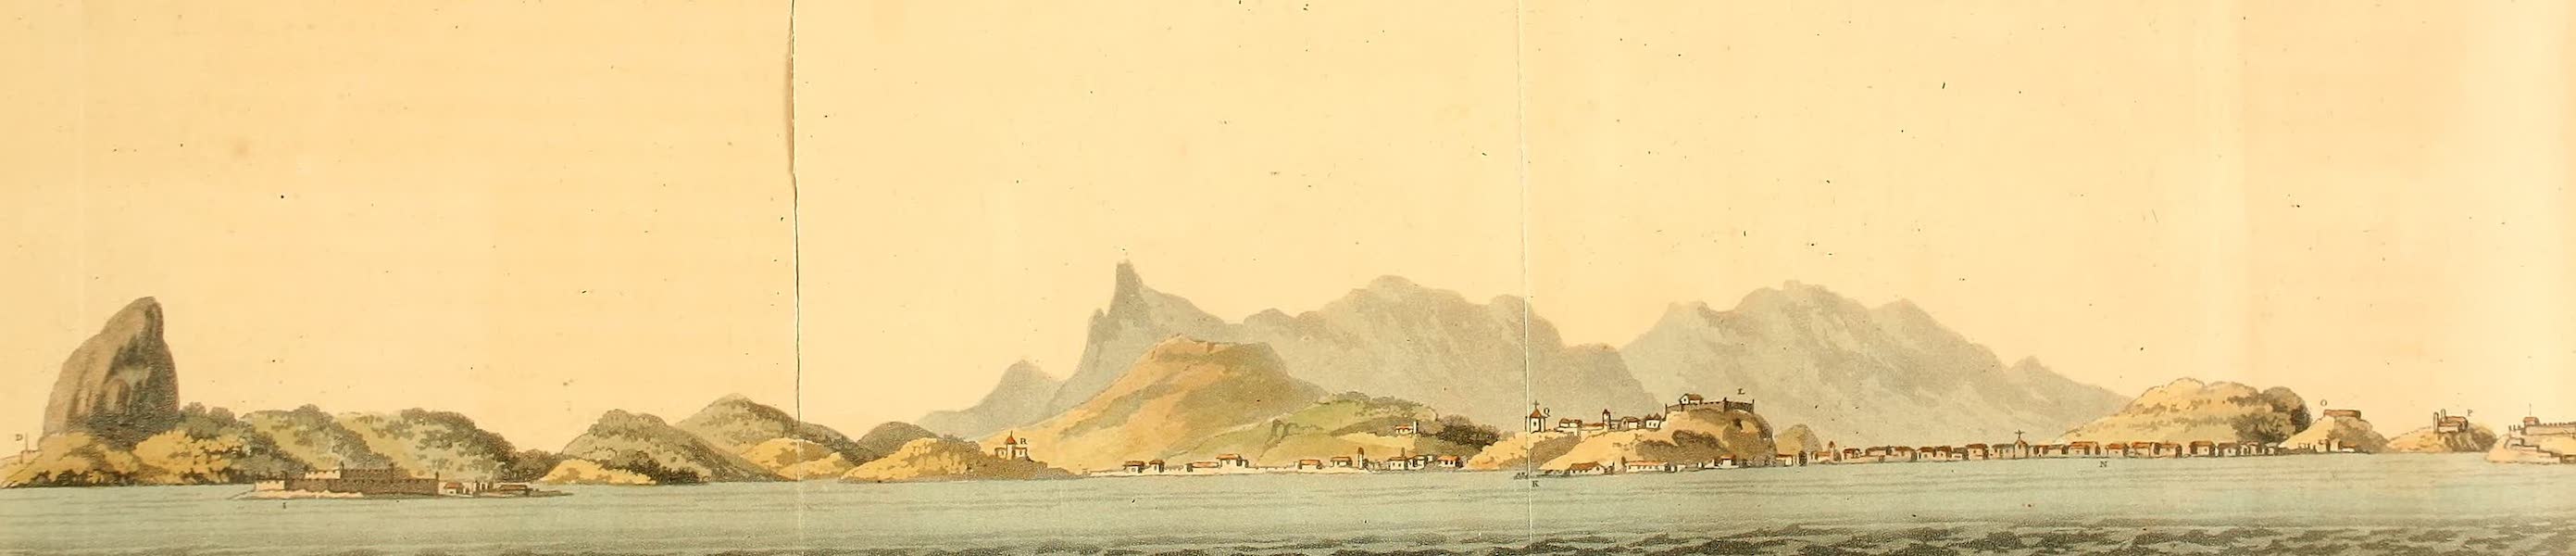 A Voyage to Cochinchina - Sketch of the Town and Harbour of Rio de Janeiro II (1806)